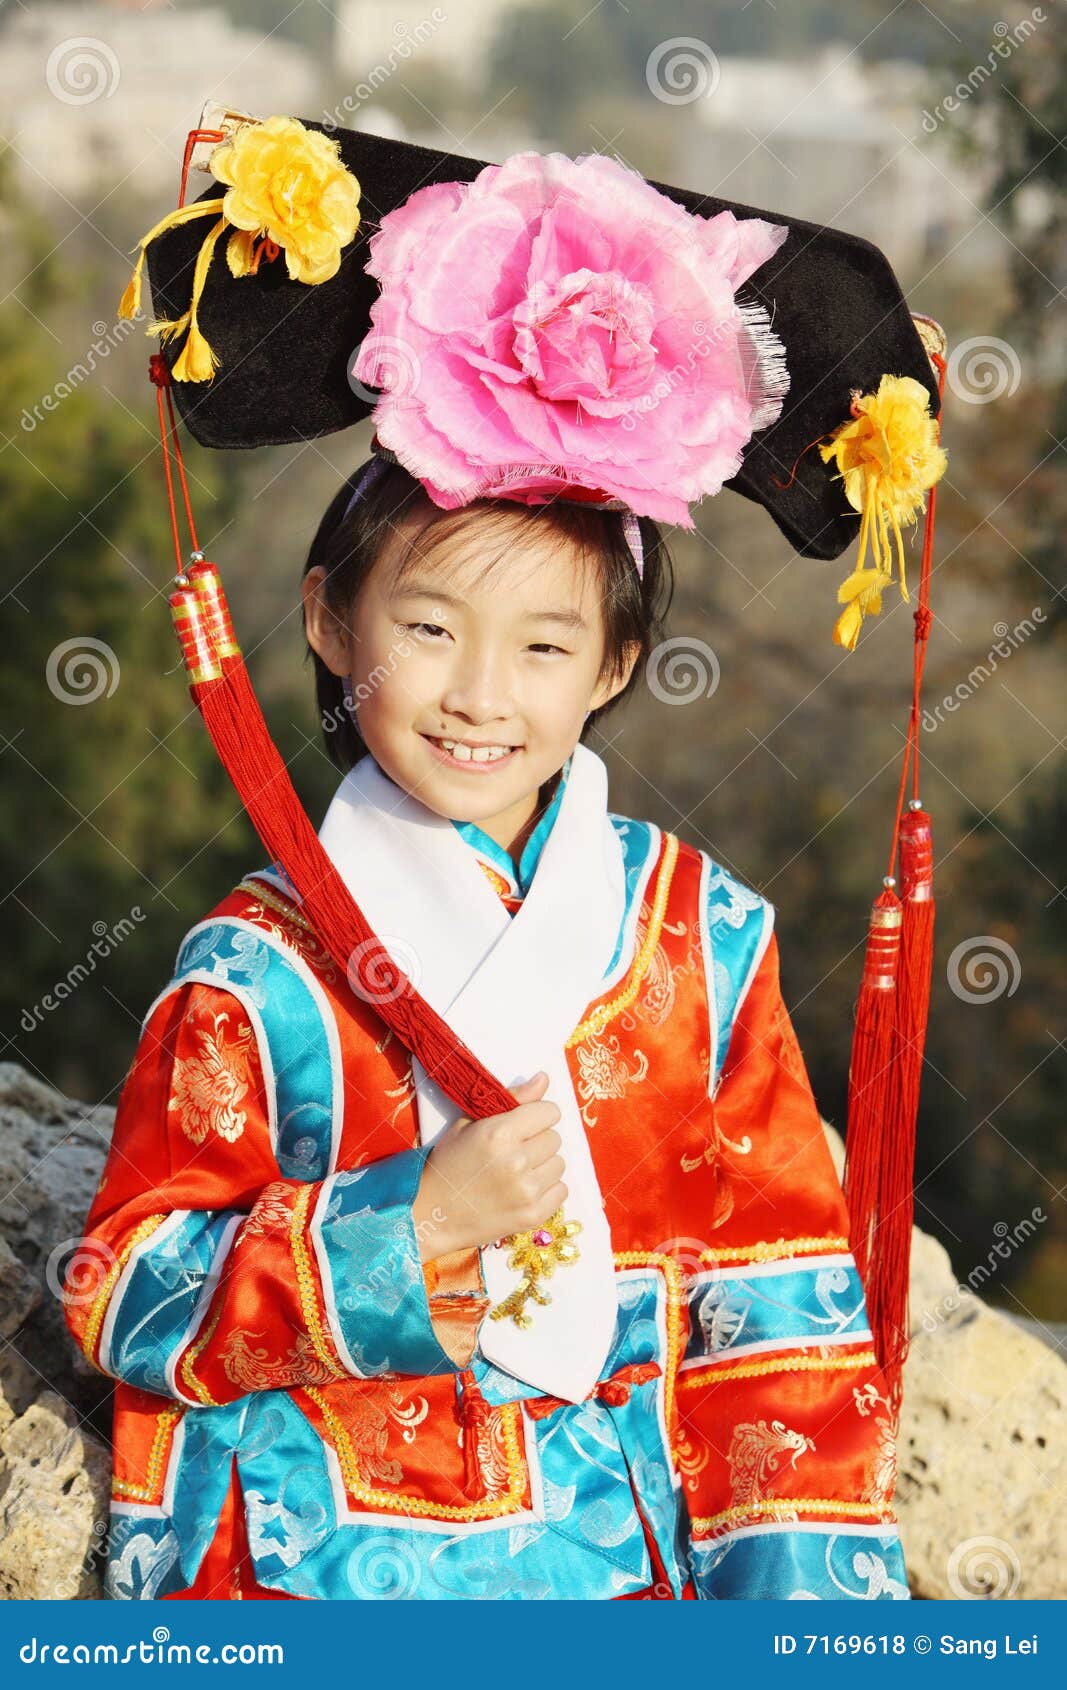 Chinese child stock photo. Image of traditional, baby - 7169618